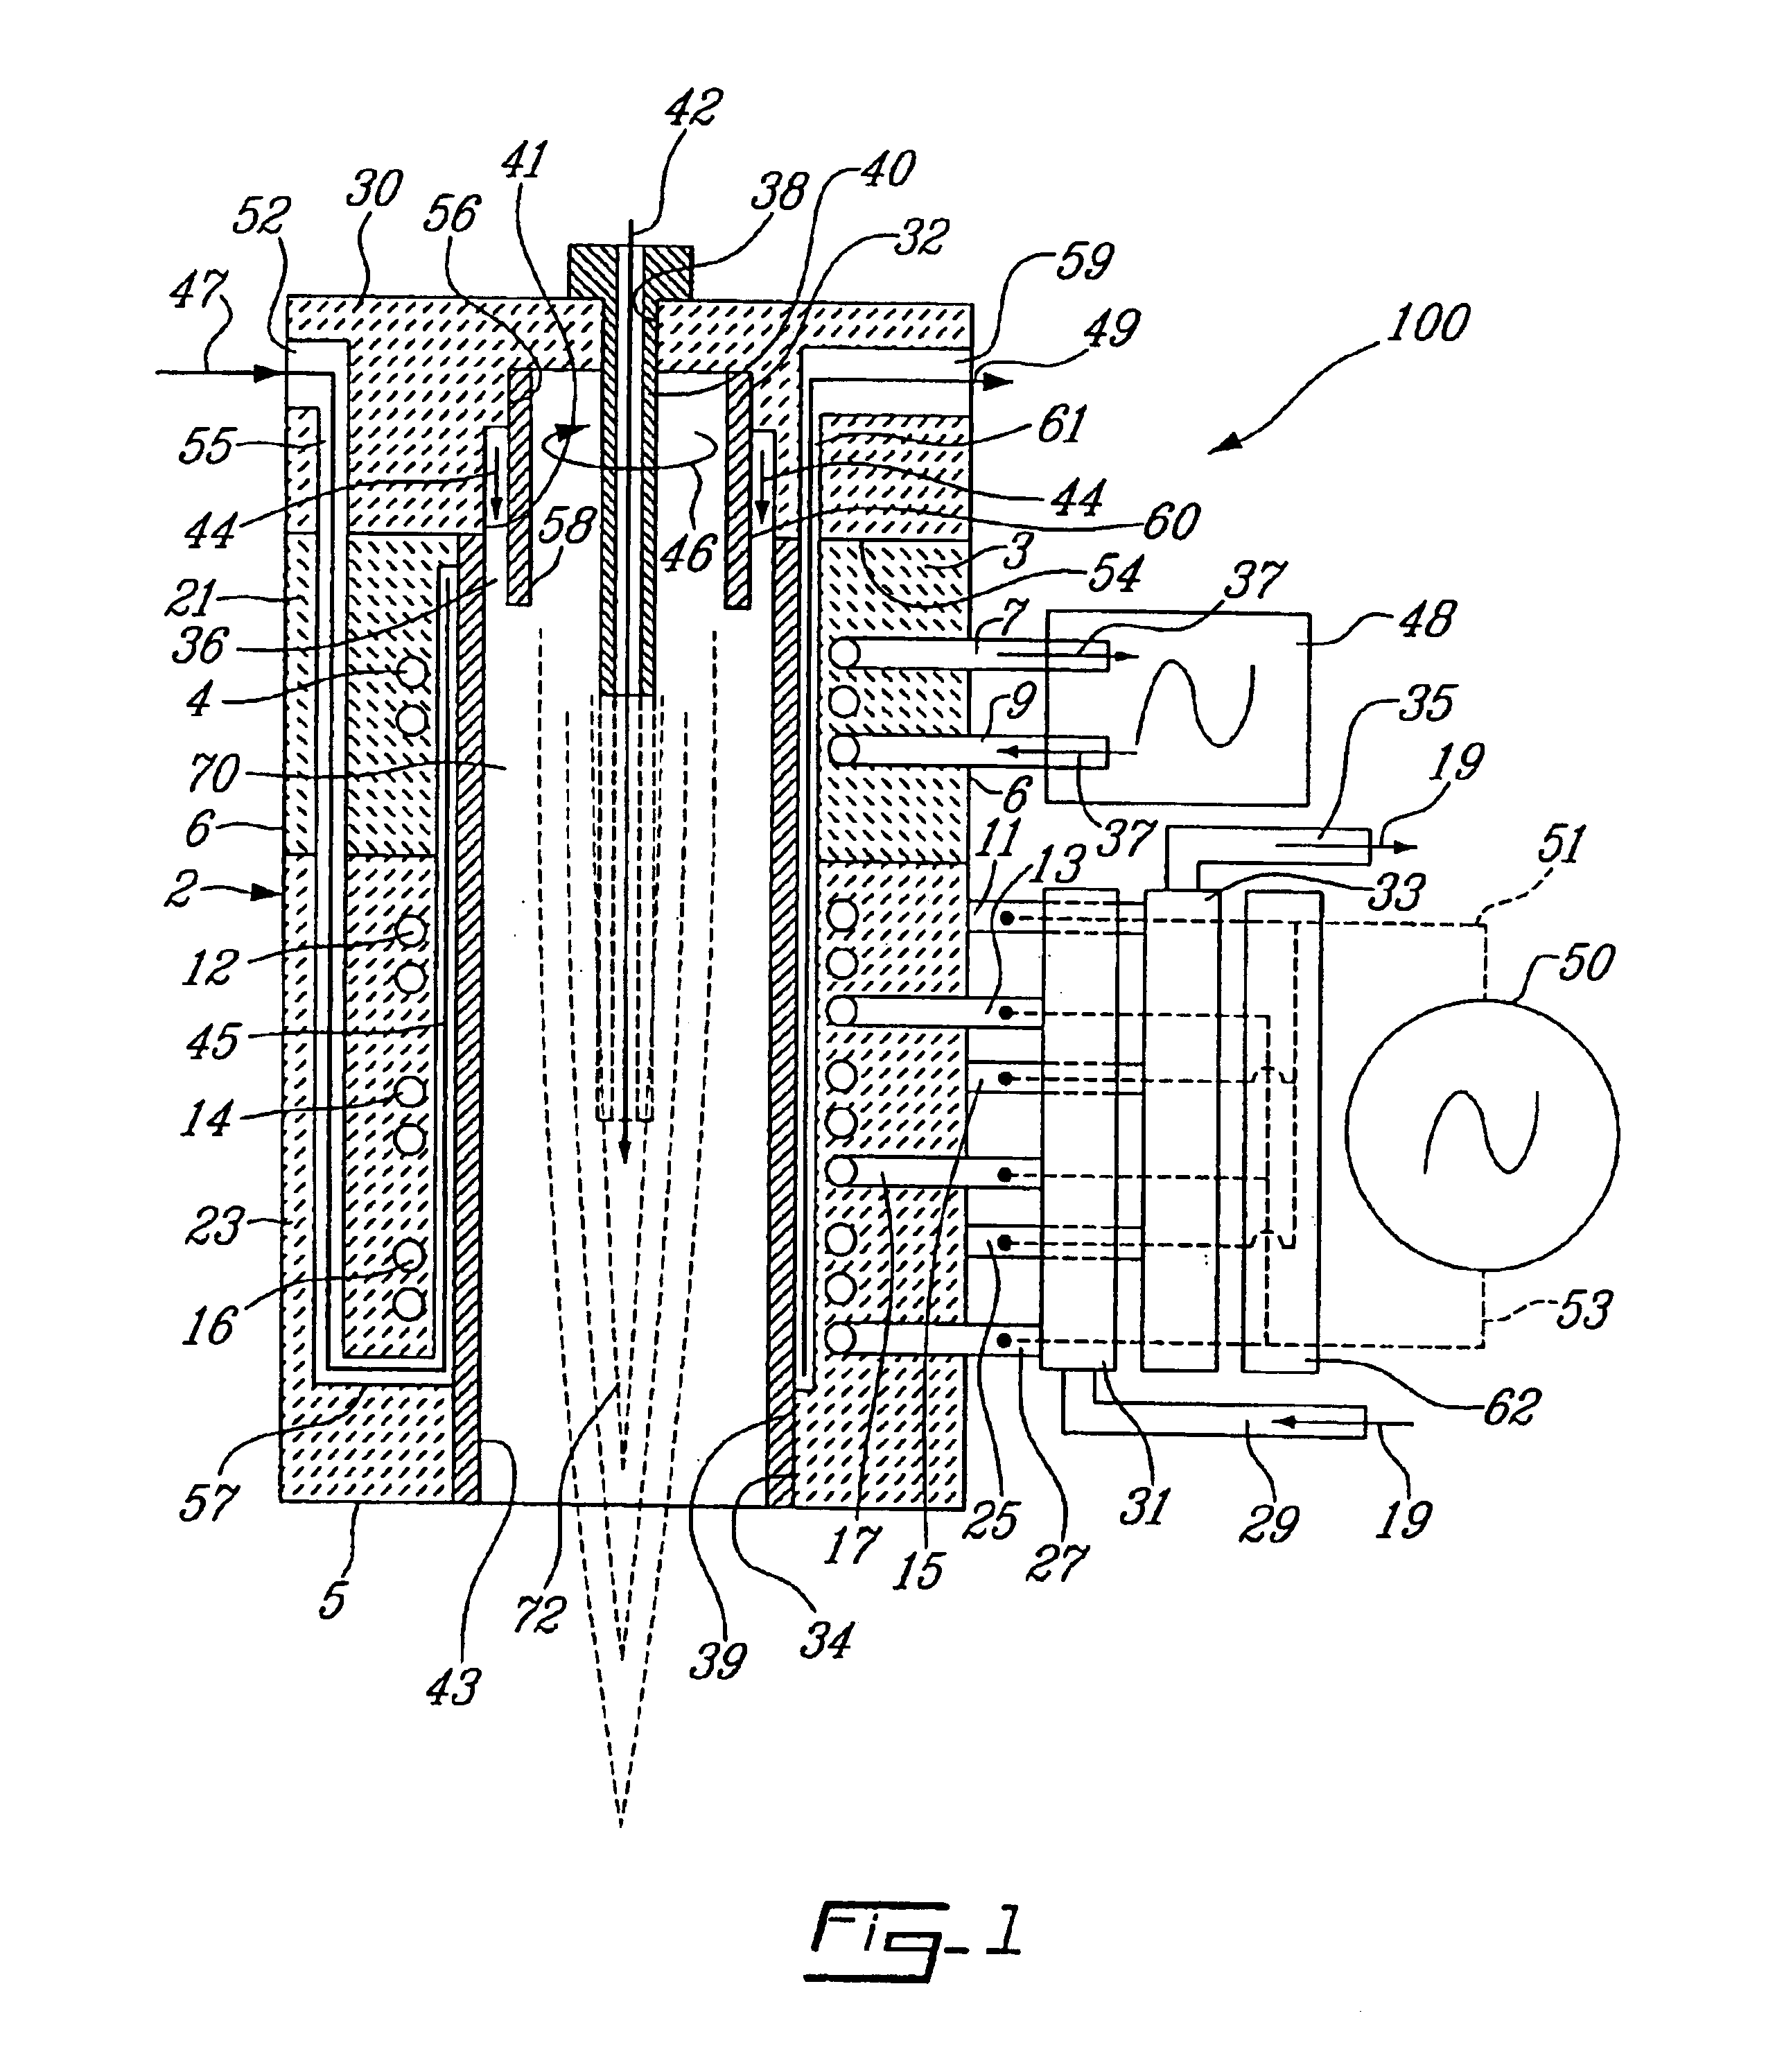 Multi-coil induction plasma torch for solid state power supply